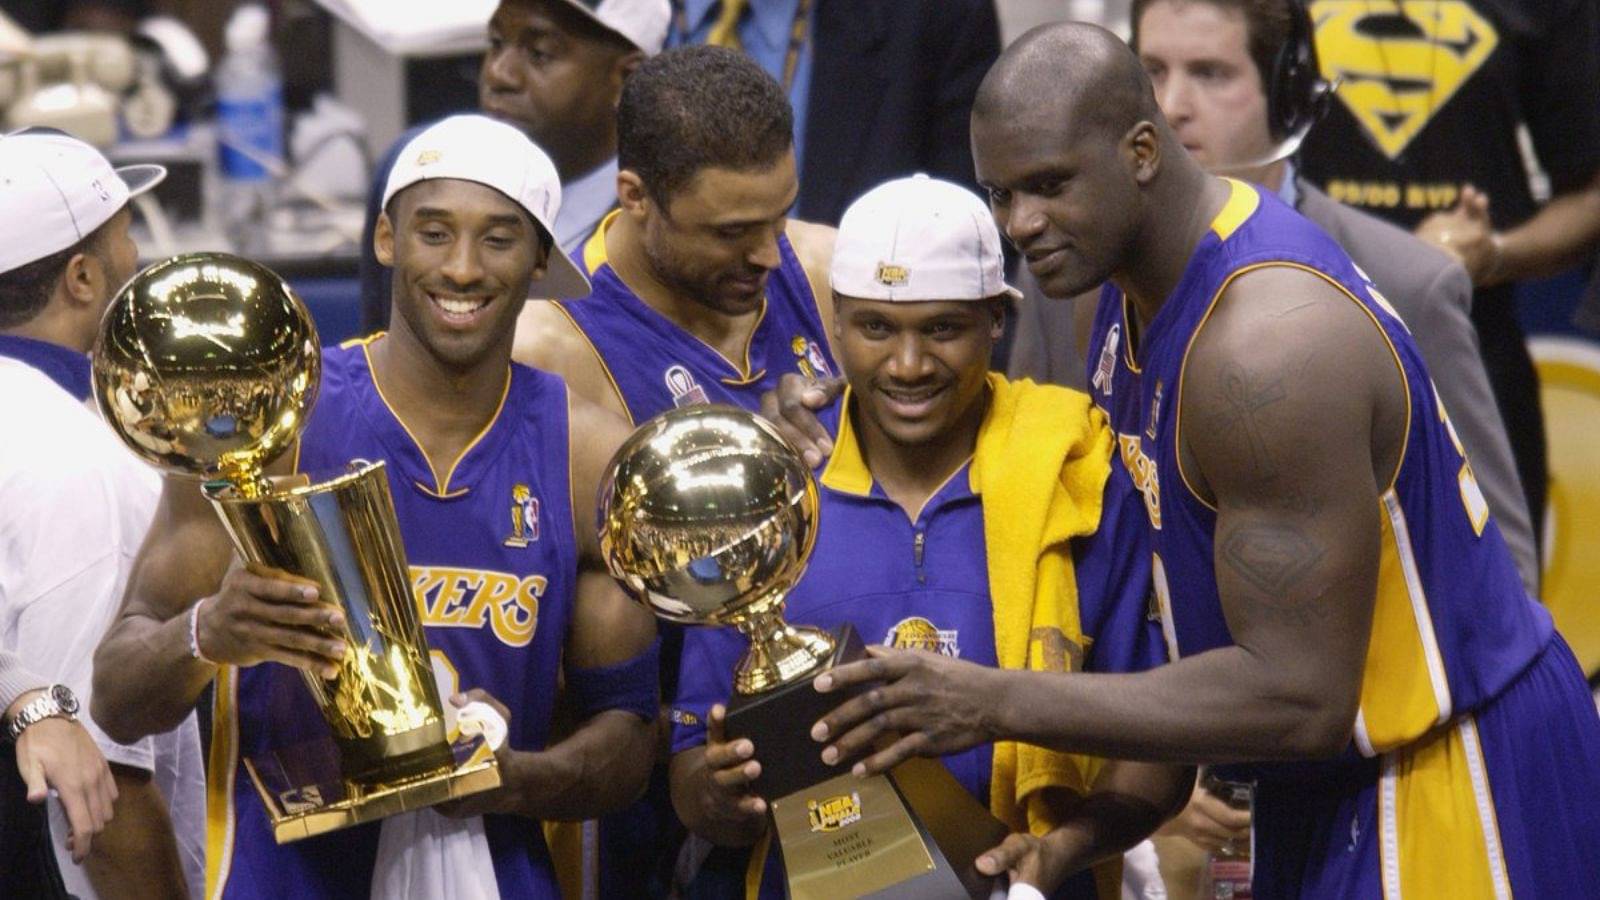 Shaquille O'Neal and Kobe Bryant's three-peat wouldn't be possible if $20 million man didn't ‘throw a towel’